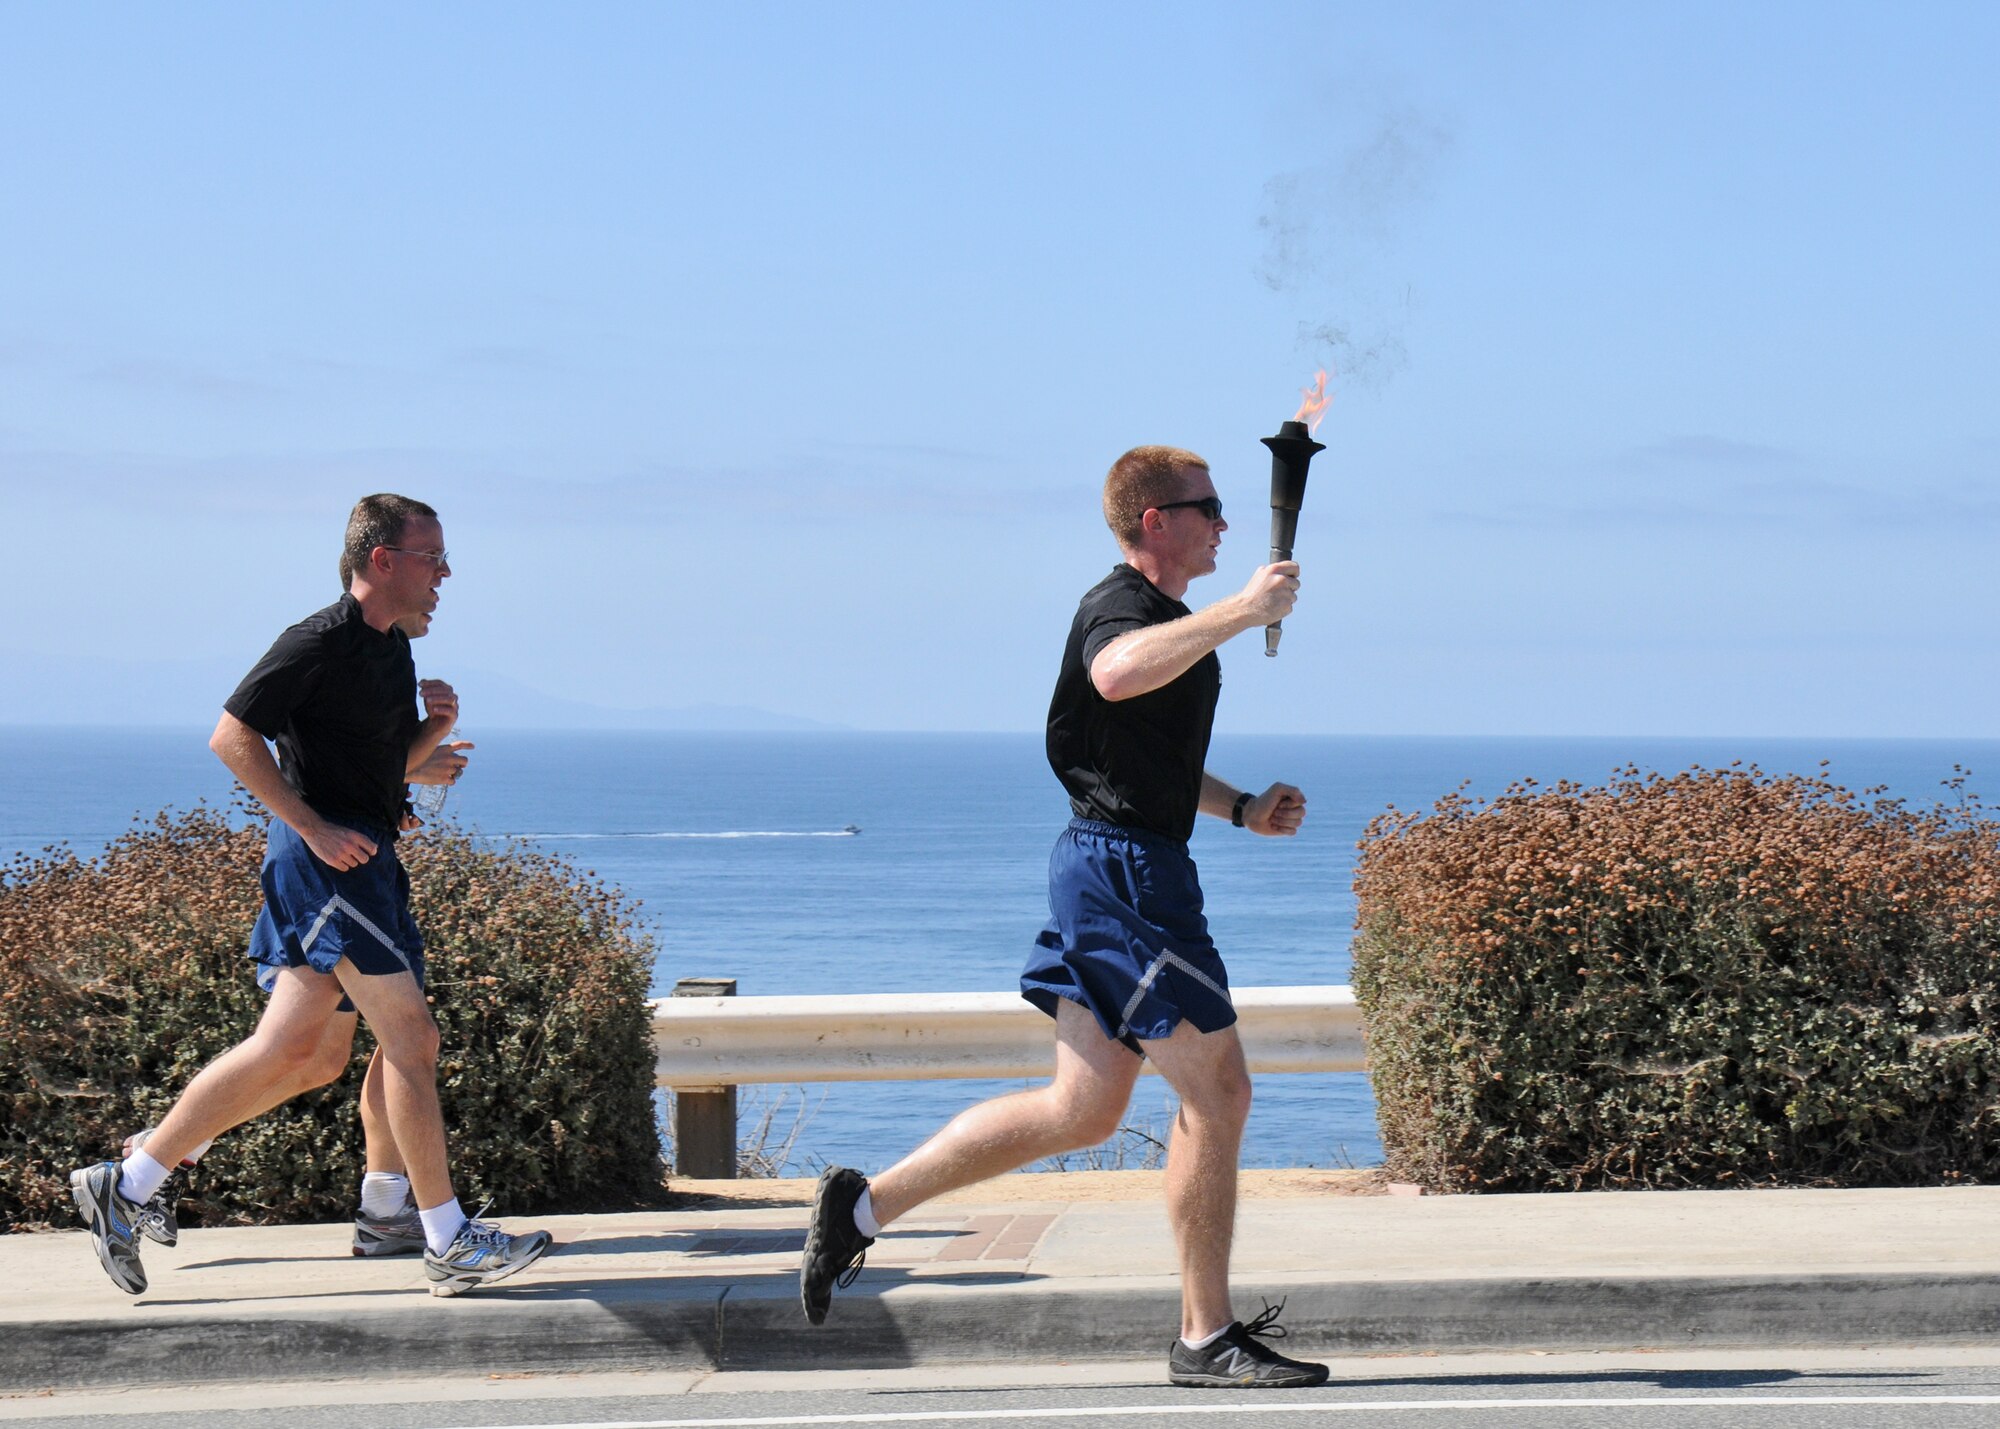 Runners run along the coast during the 24-hour POW-MIA torch relay run, Sept. 18. The event sponsored by the Los Angeles Air Force Base Company Grade Officers Council began at Terminal Island Coast Guard Base in San Pedro and concludes 54 miles later at Los Angeles AFB in El Segundo. (Photo by Joe Juarez)